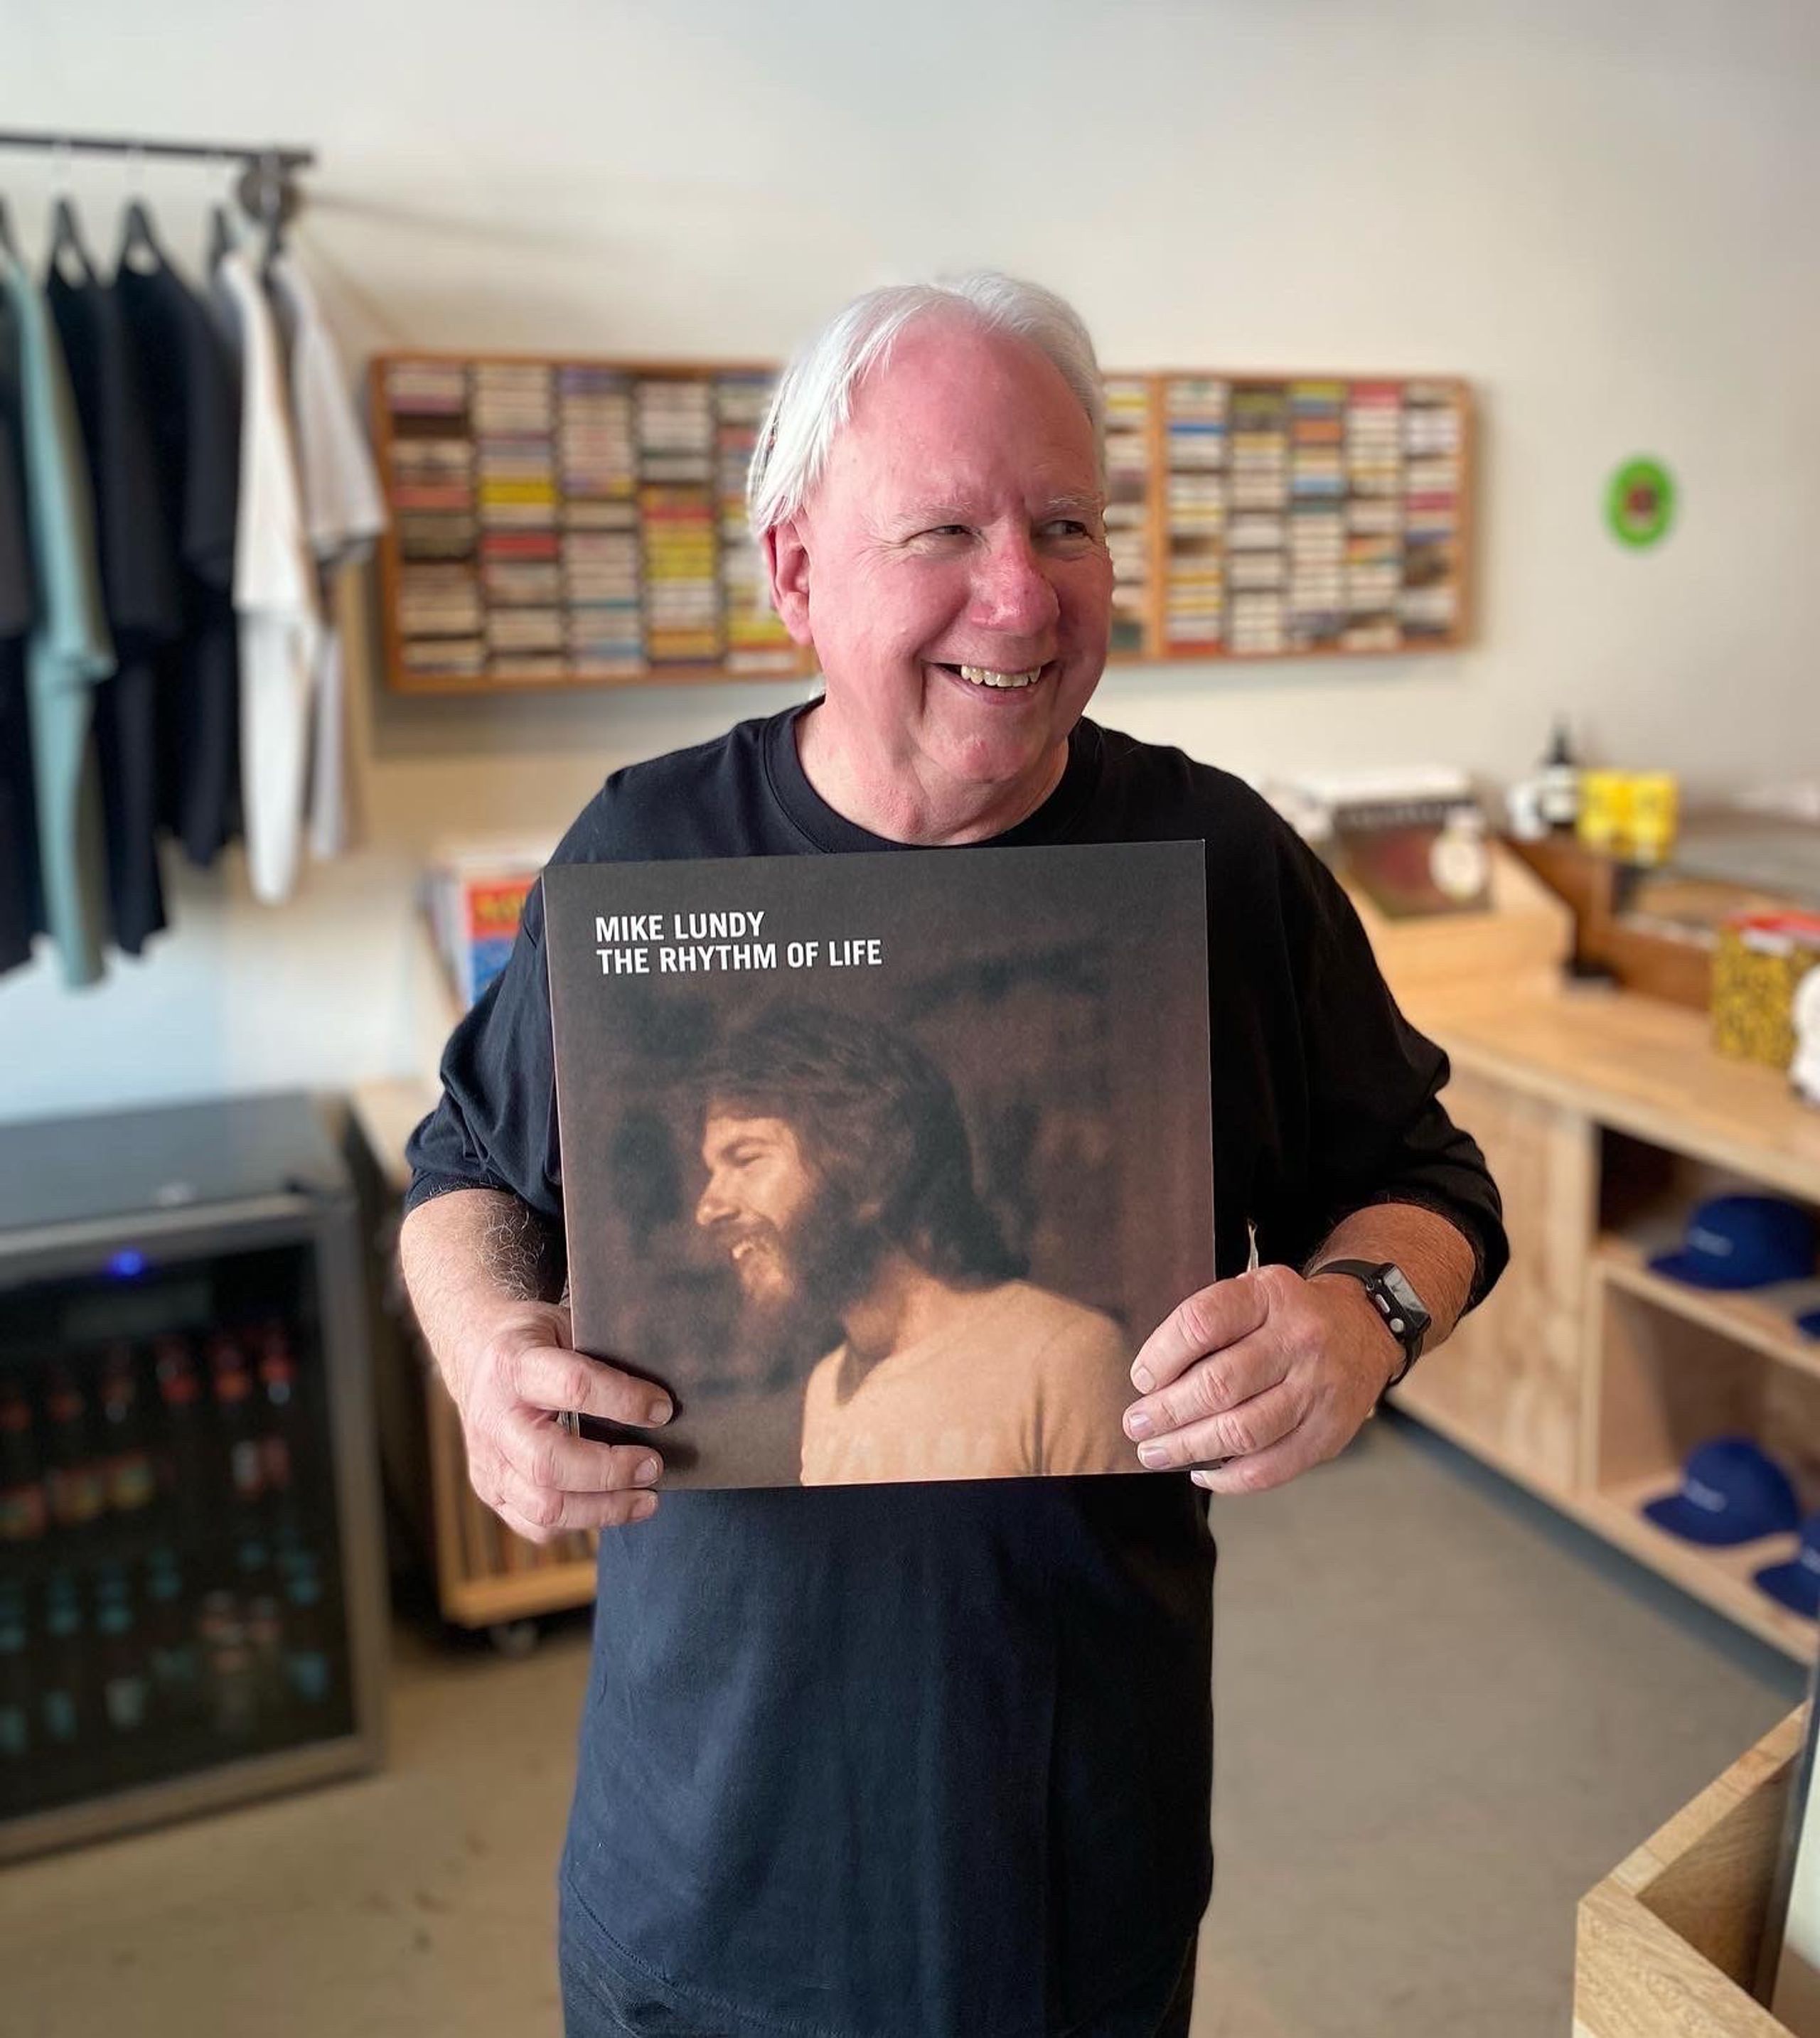 Mike Lundy holding a copy of his vinyl record "The Rhythm of Life"